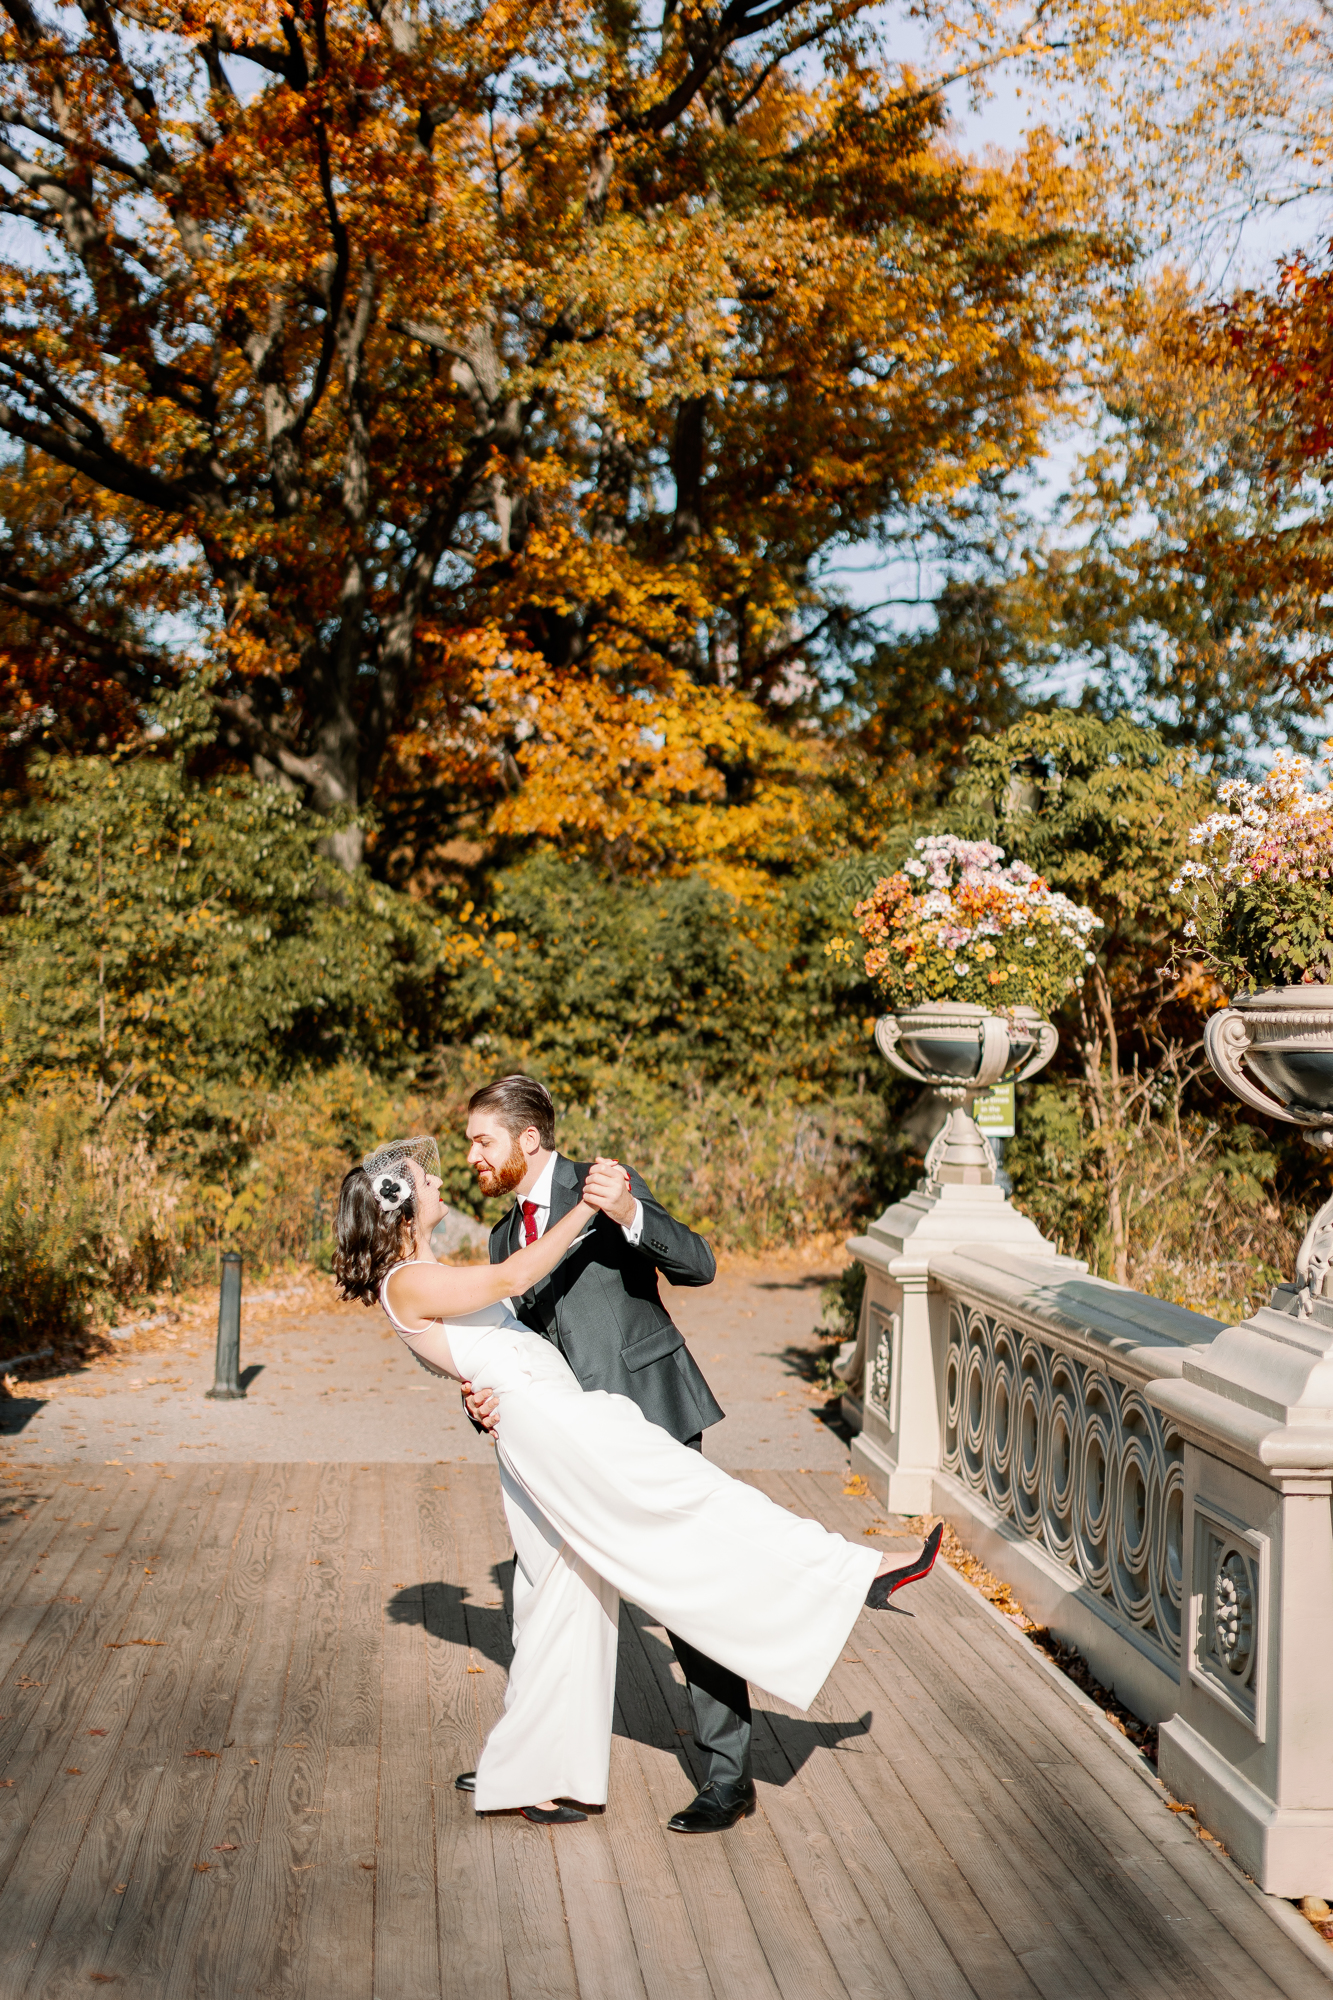 Best Restaurants to Eat at After a Iconic Central Park Elopement